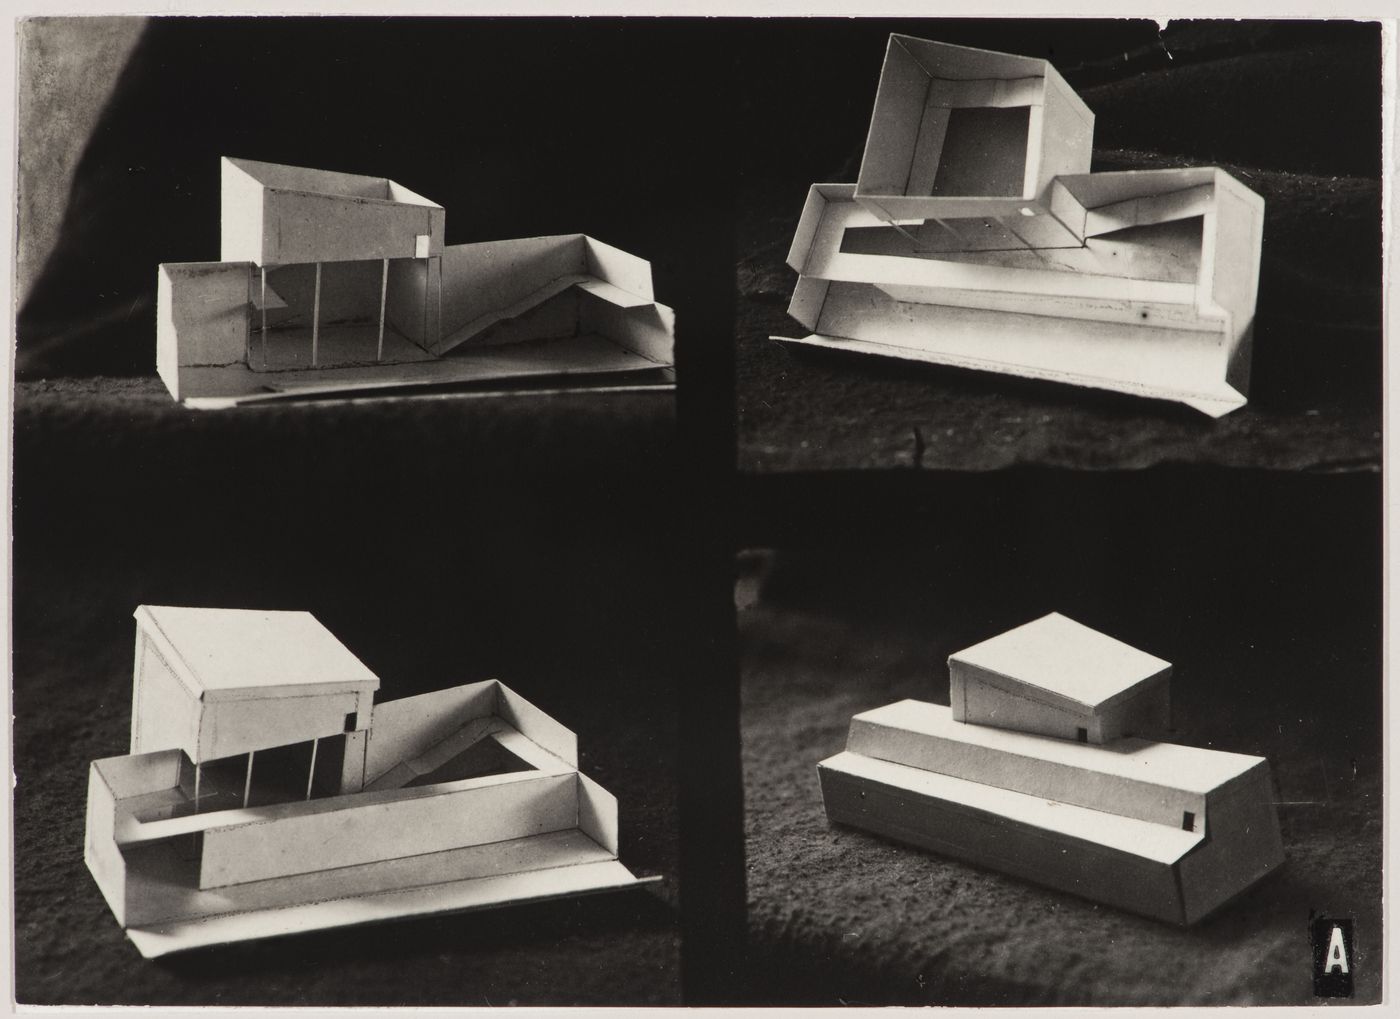 Photograph showing four views of a model for an exhibition building for an All-Union Palace of the Arts, Moscow